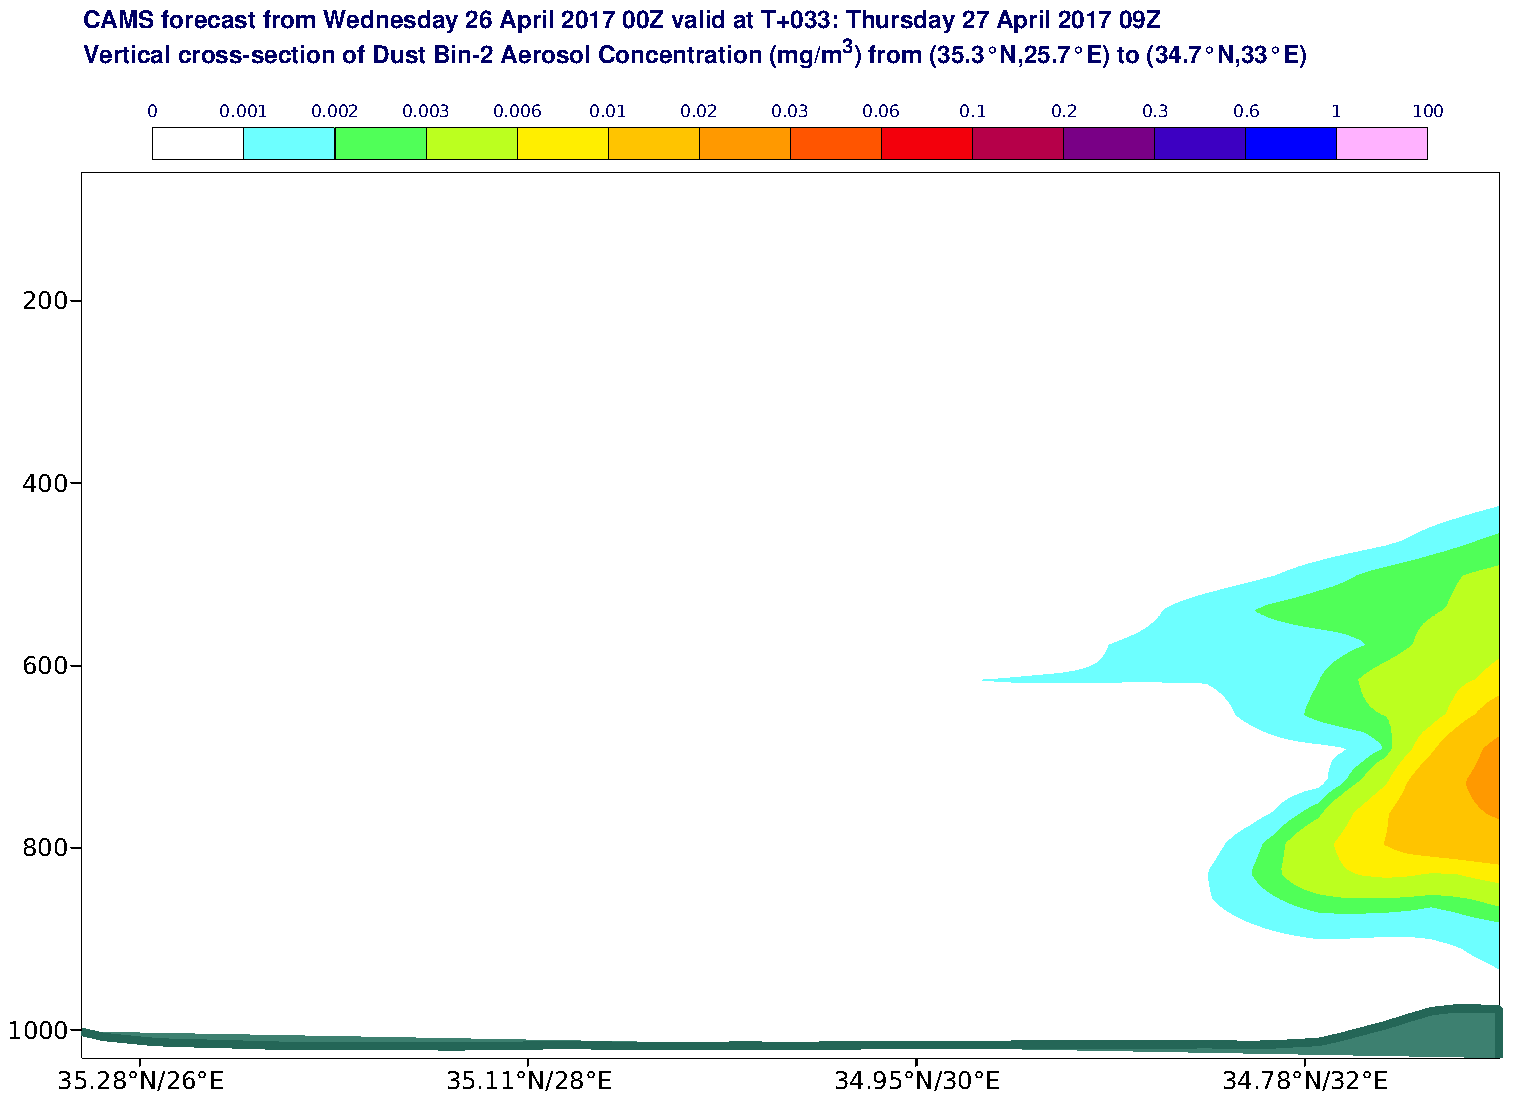 Vertical cross-section of Dust Bin-2 Aerosol Concentration (mg/m3) valid at T33 - 2017-04-27 09:00